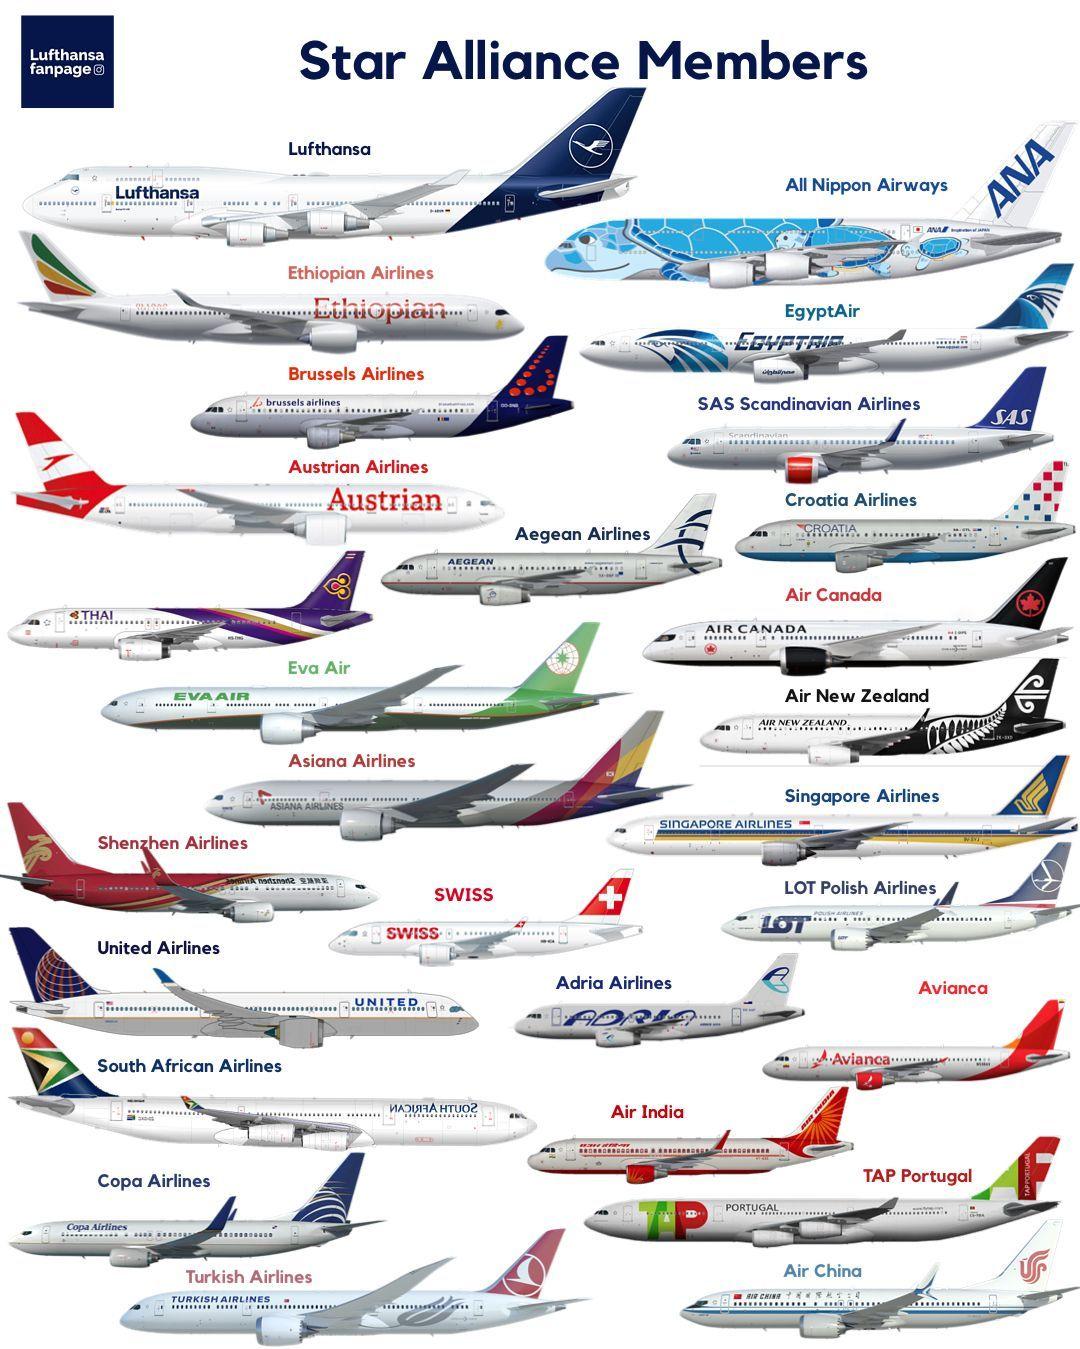 World's Largest Airline Logo - staralliance, and are the largest airline